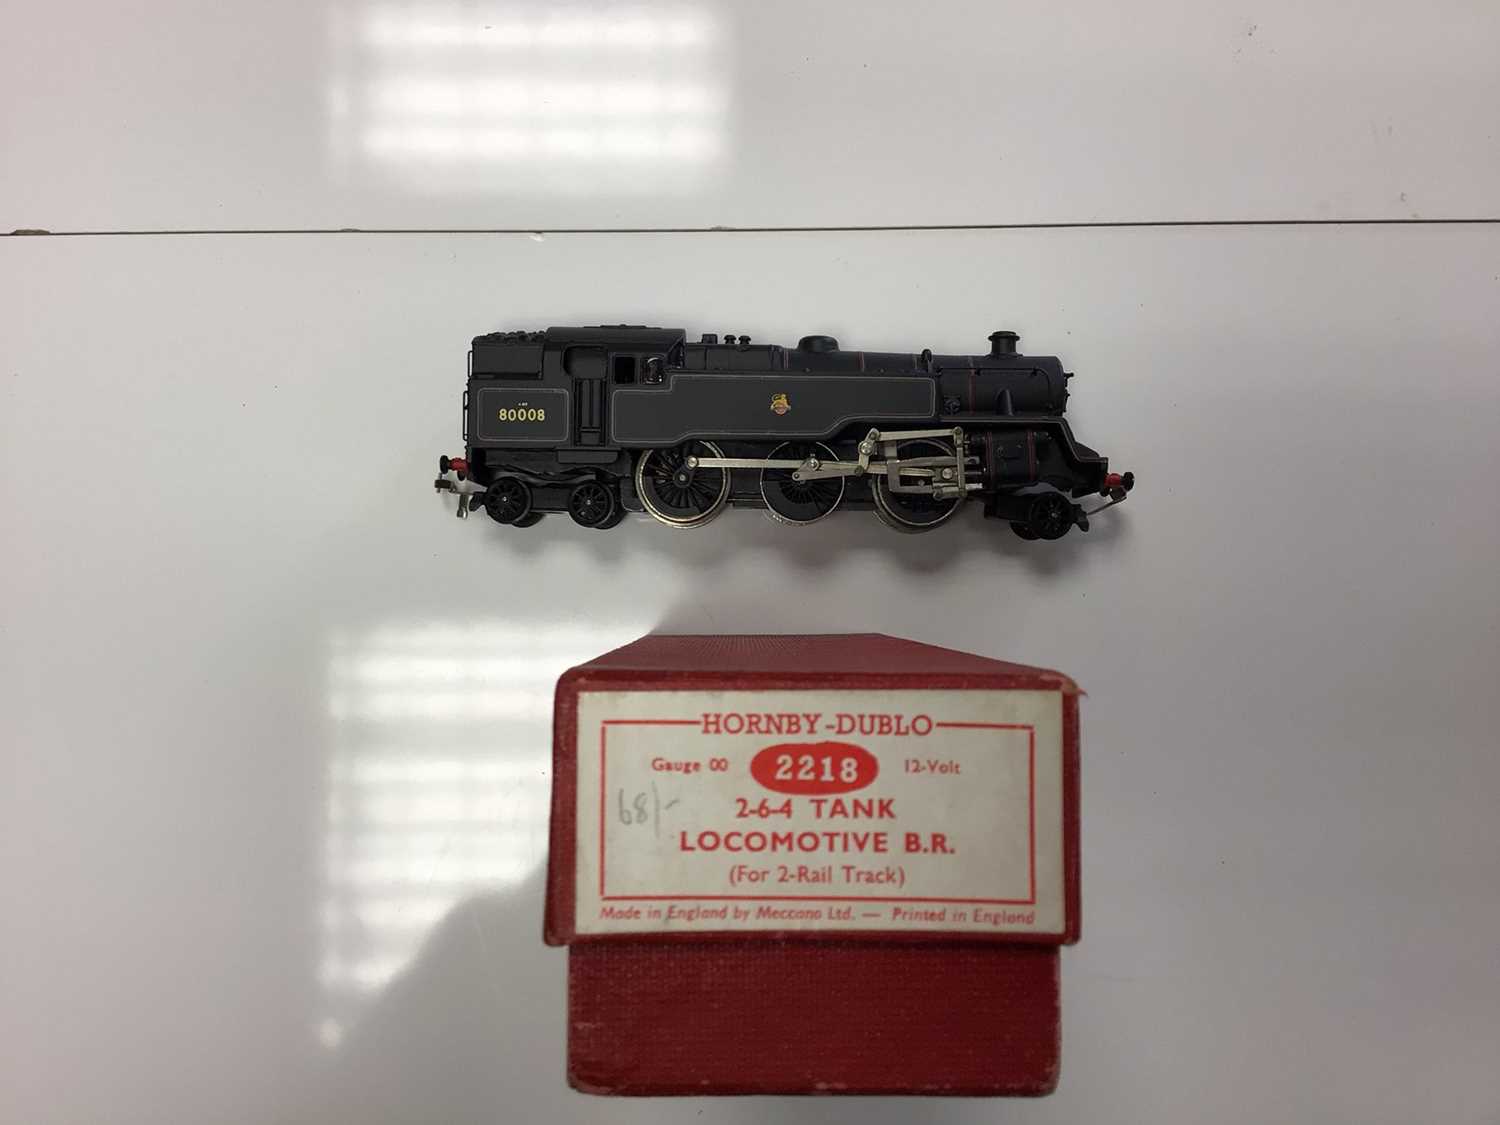 Hornby Duplo 2 railBR black Early Emblem 2-6- 4 Class 4MT tank locomotive 80008, boxed 2218, BR gre - Image 2 of 9